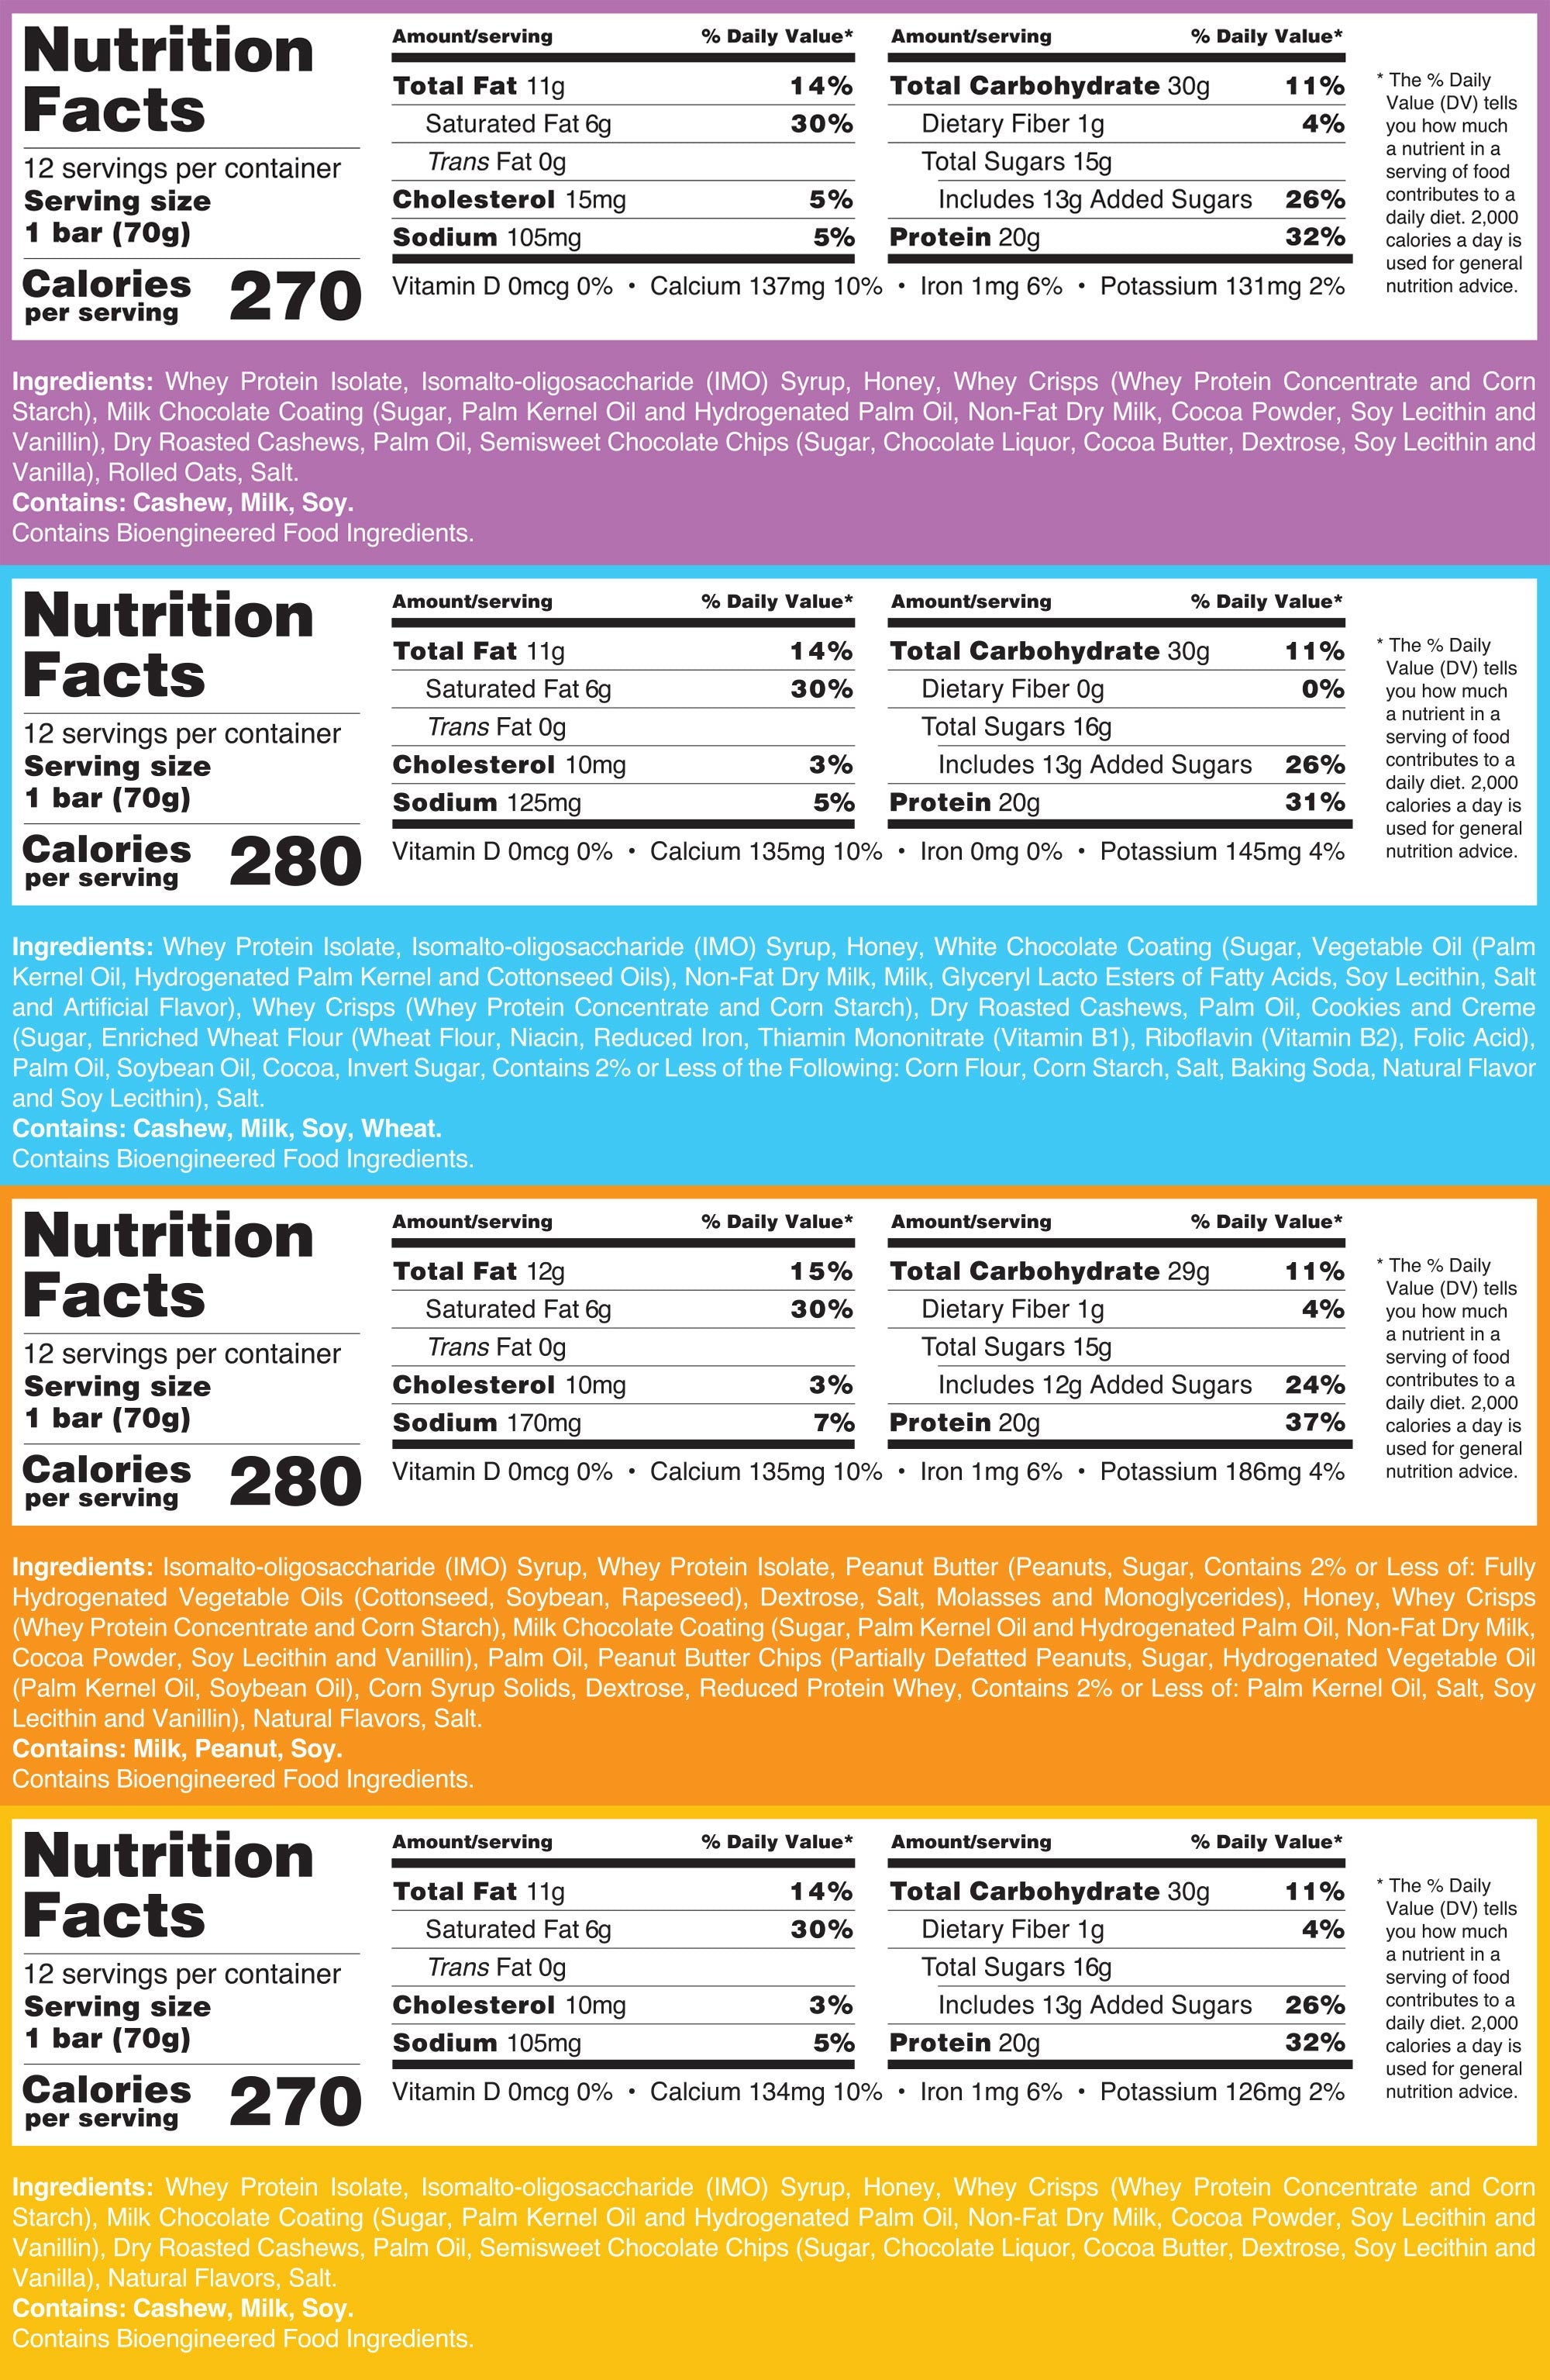 Variety Pack Nutrition Facts